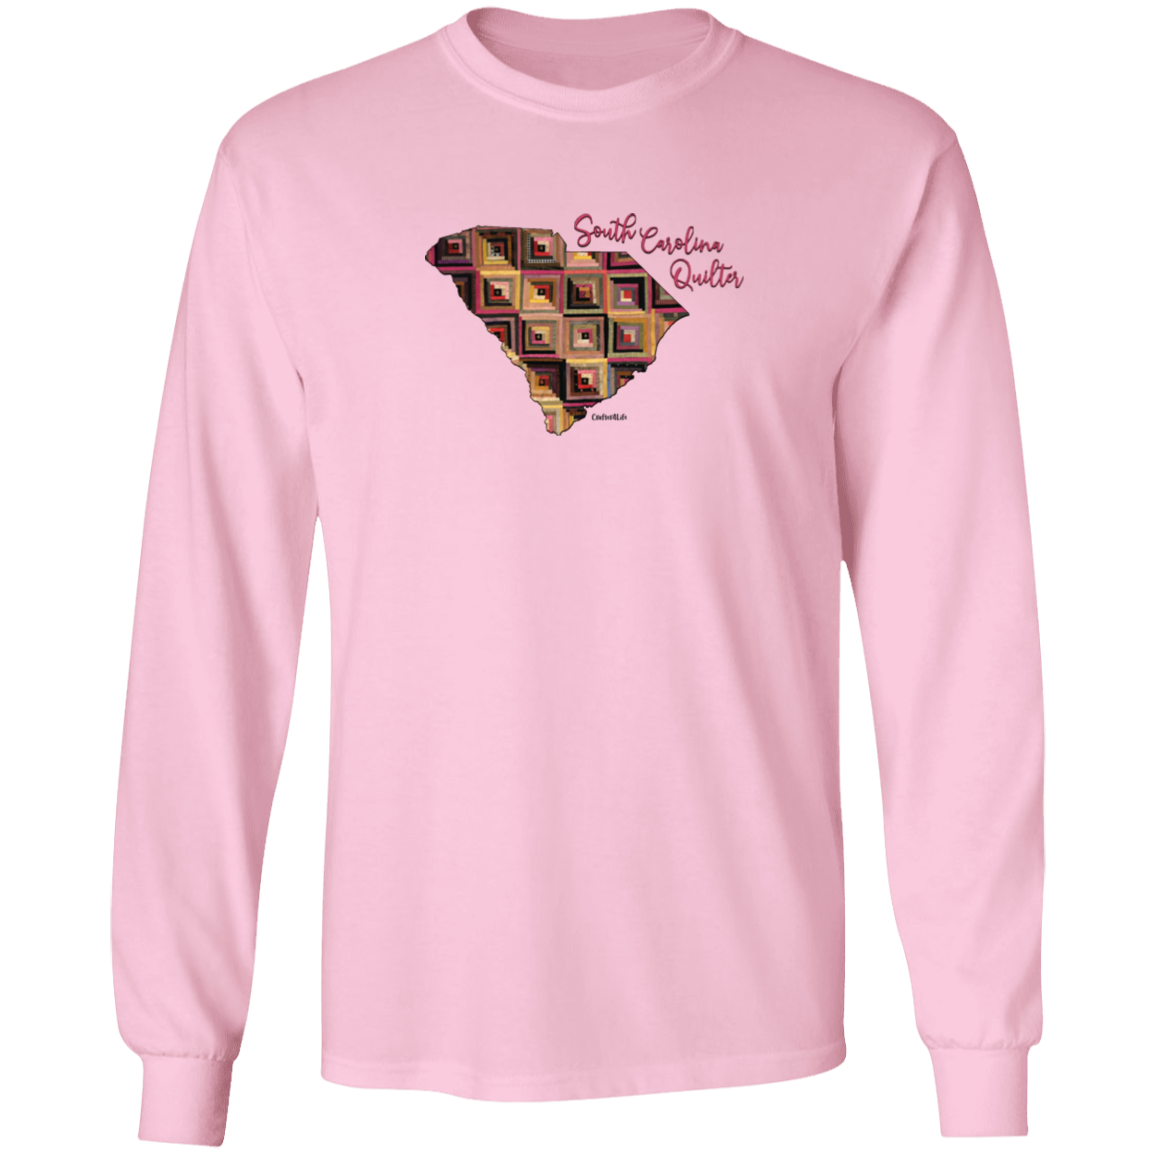 South Carolina Quilter Long Sleeve T-Shirt, Gift for Quilting Friends and Family